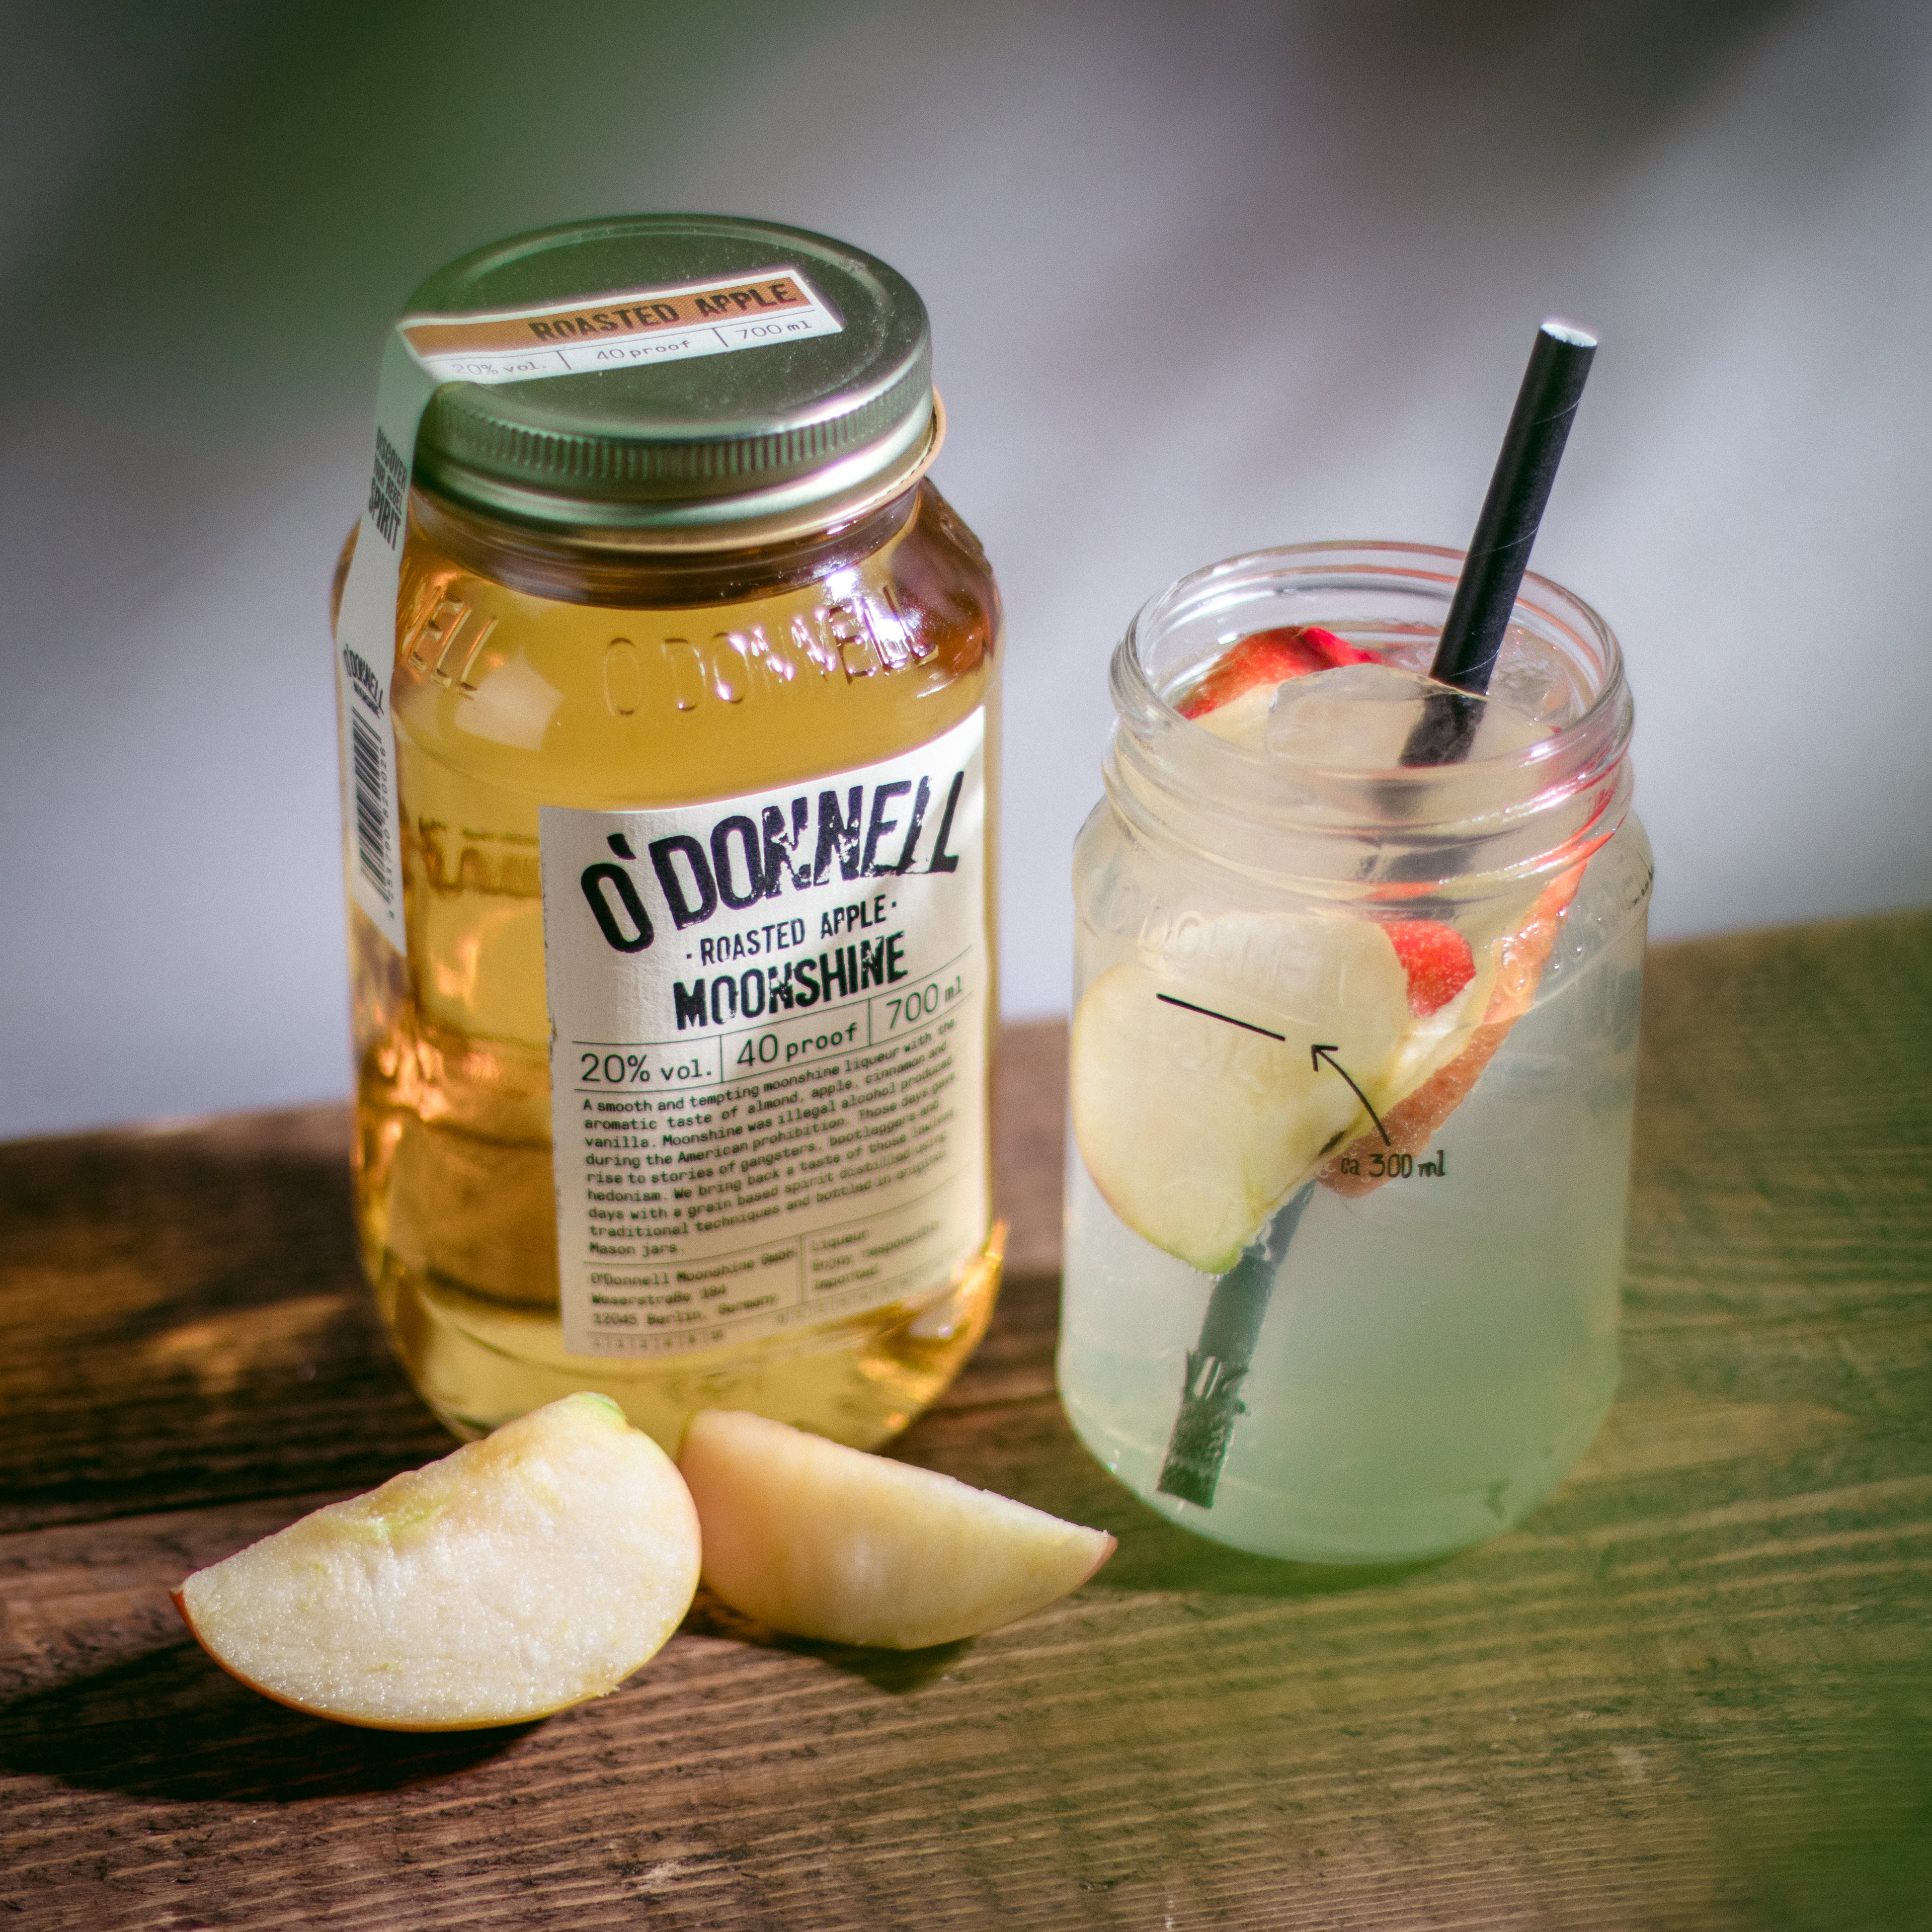 O Donnell Moonshine Spicy Roasted Apple